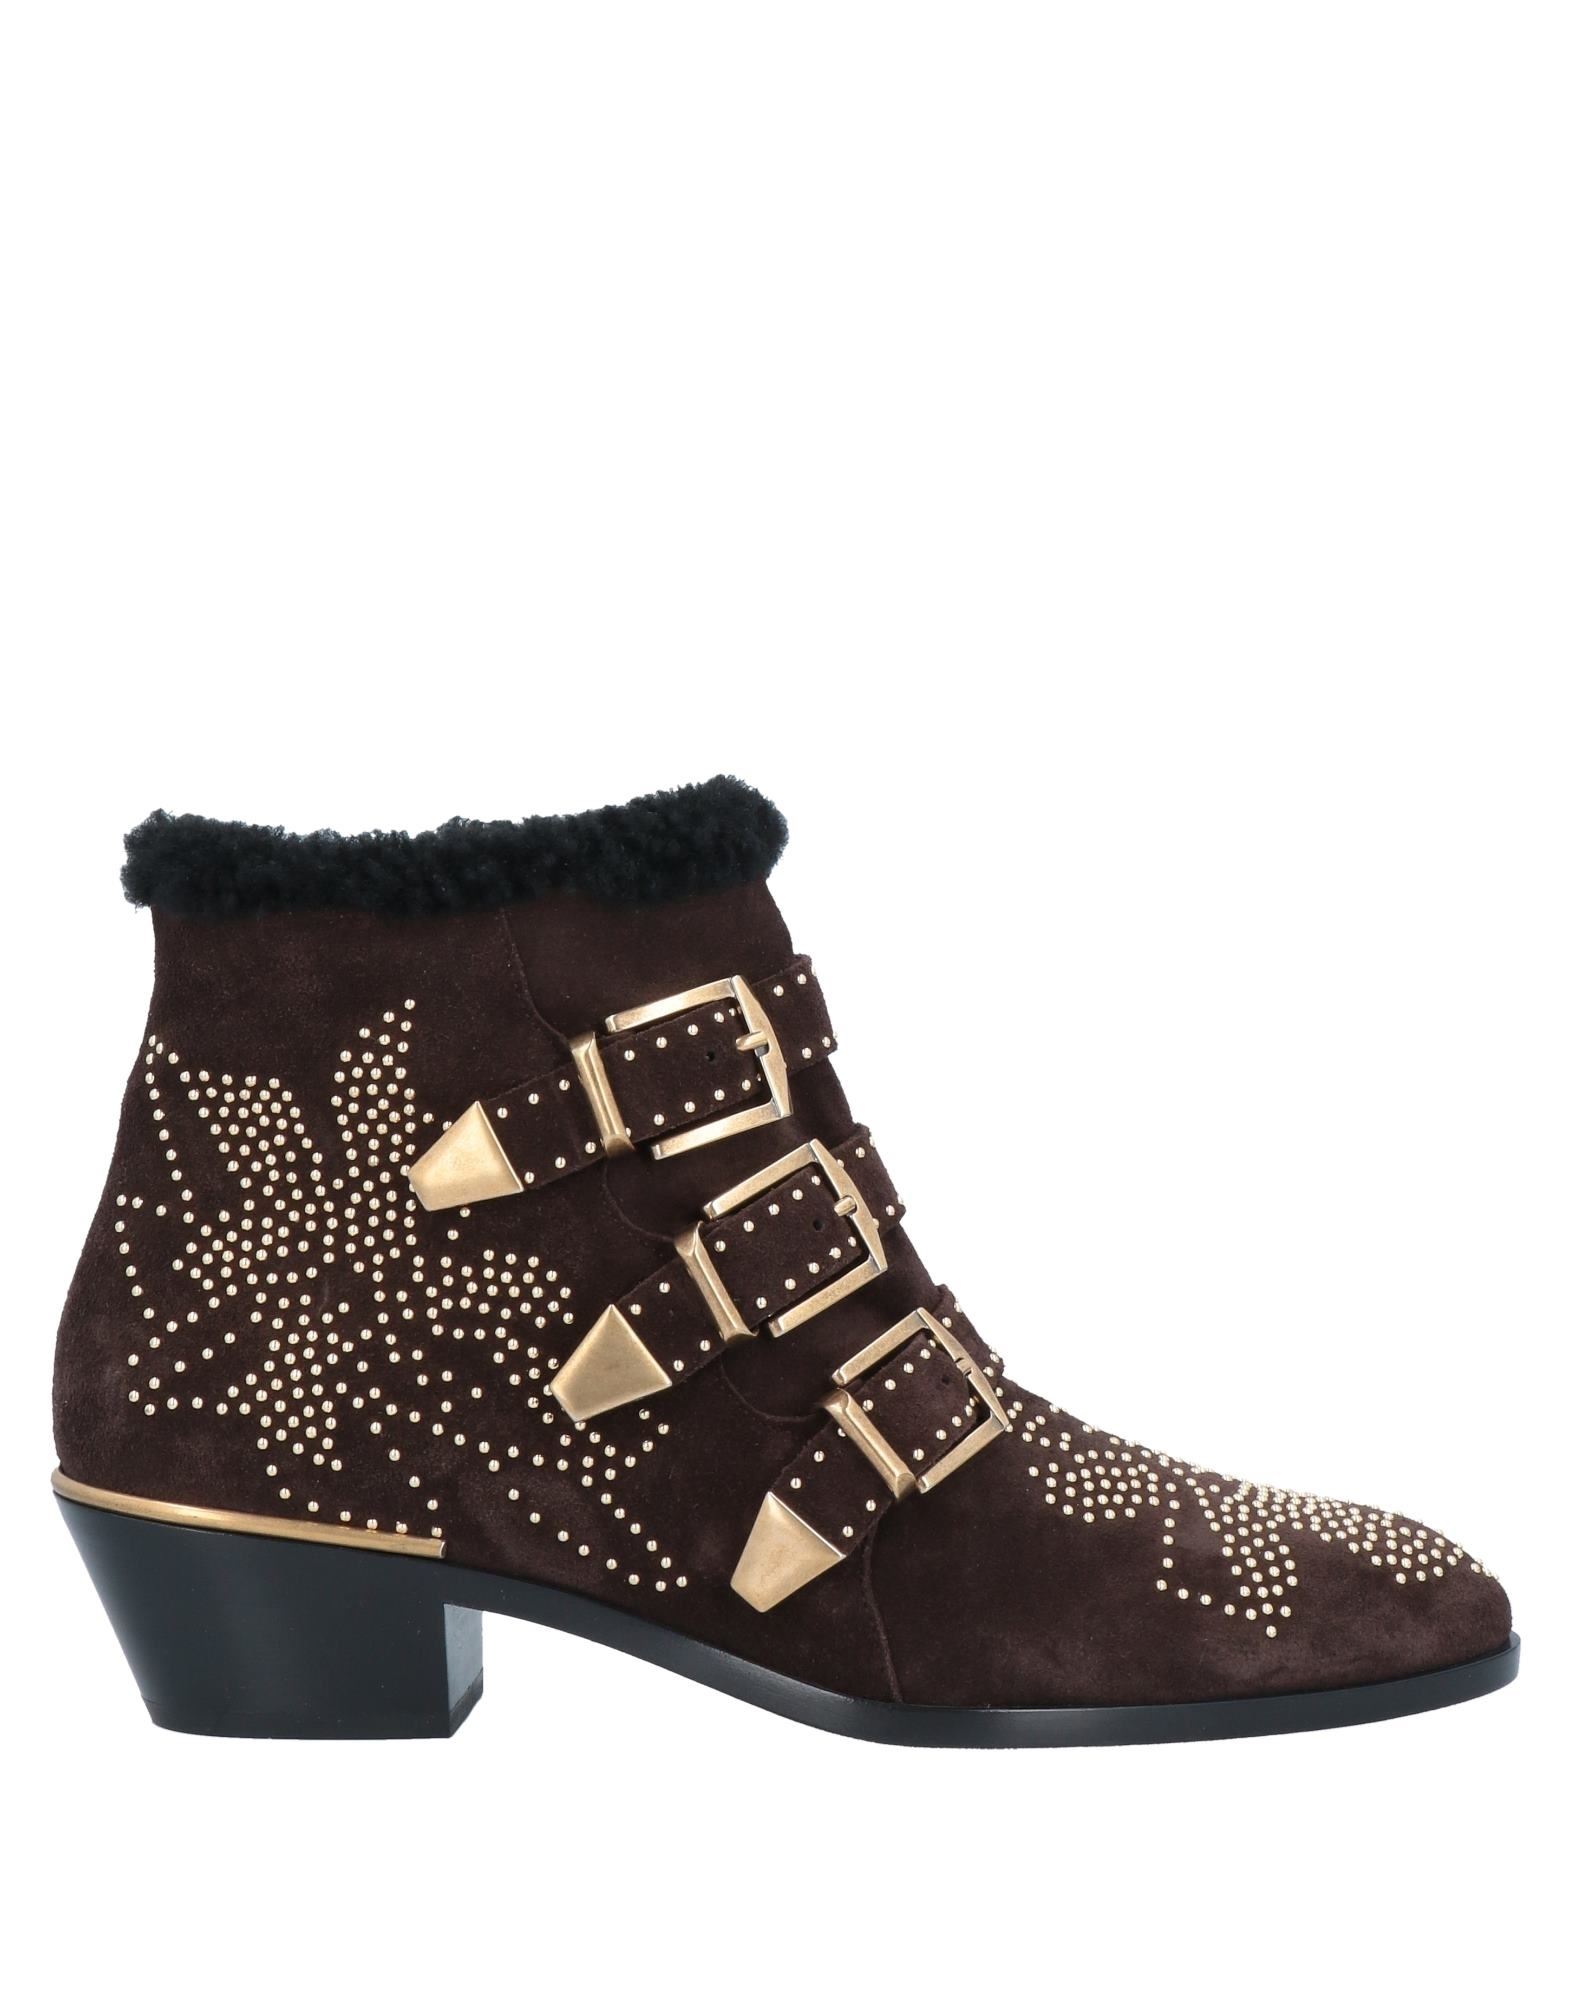 Chloé Ankle Boots In Dark Brown